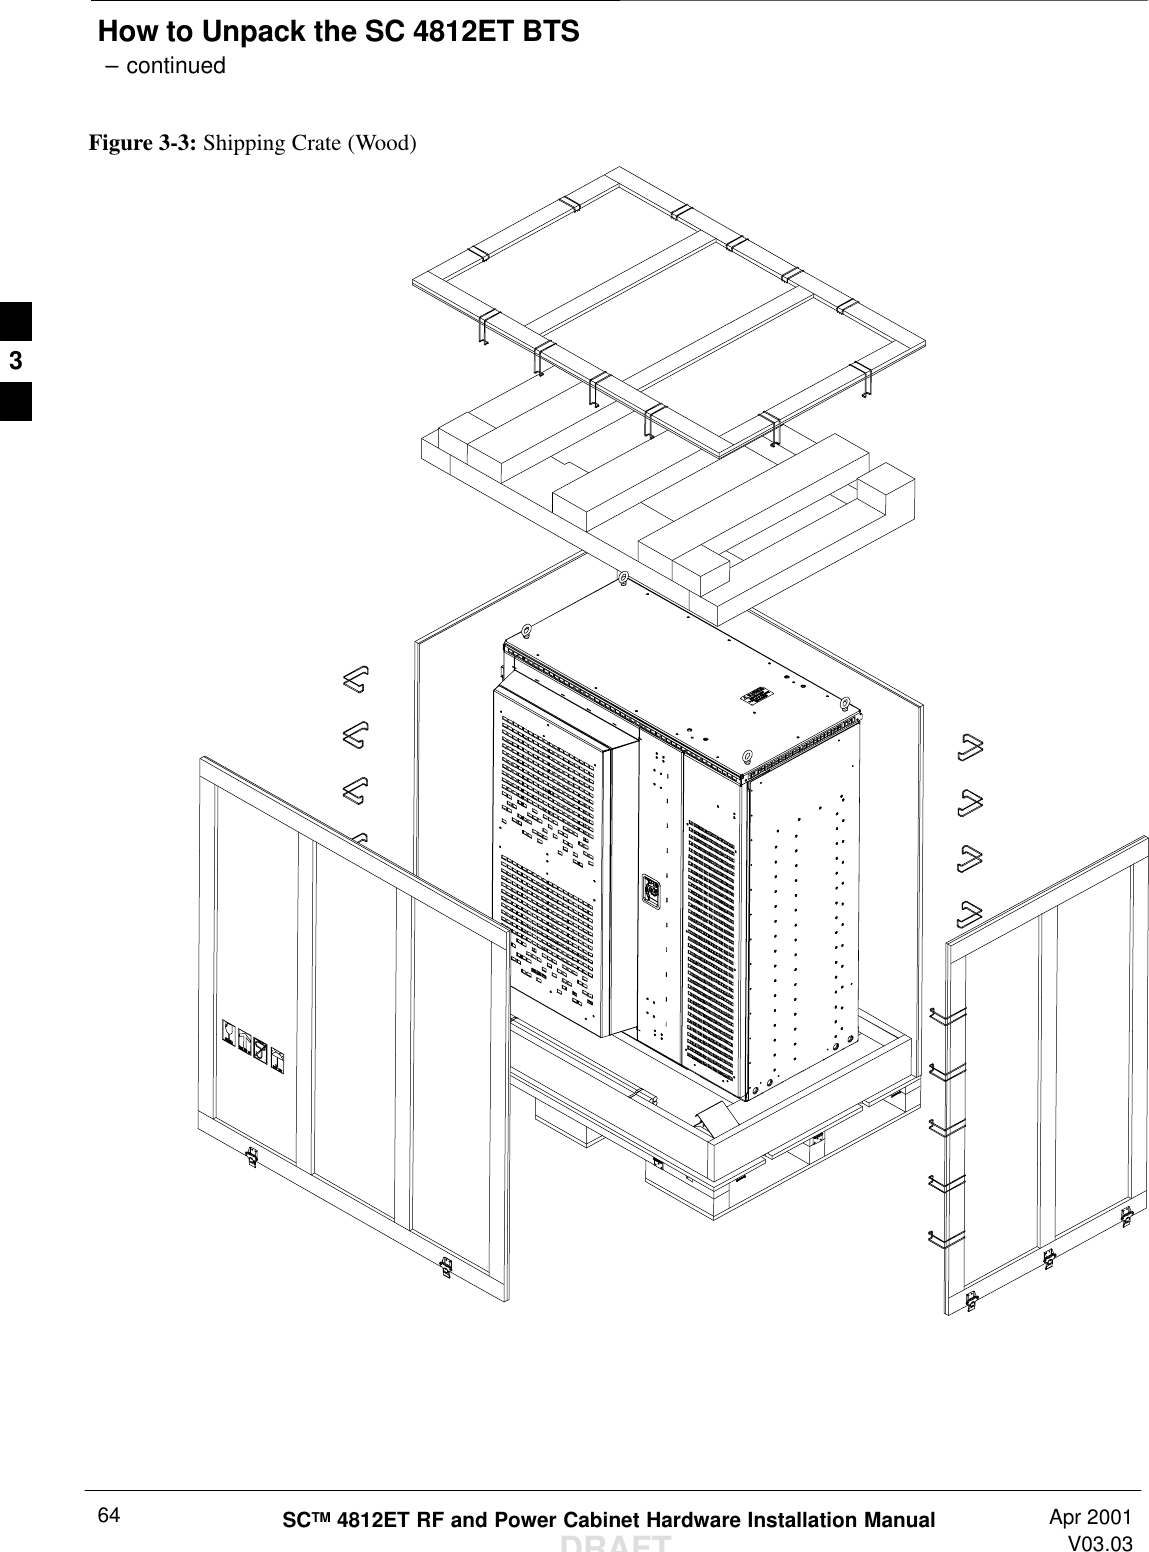 How to Unpack the SC 4812ET BTS – continuedDRAFTSCTM 4812ET RF and Power Cabinet Hardware Installation Manual Apr 2001V03.0364Figure 3-3: Shipping Crate (Wood)  3